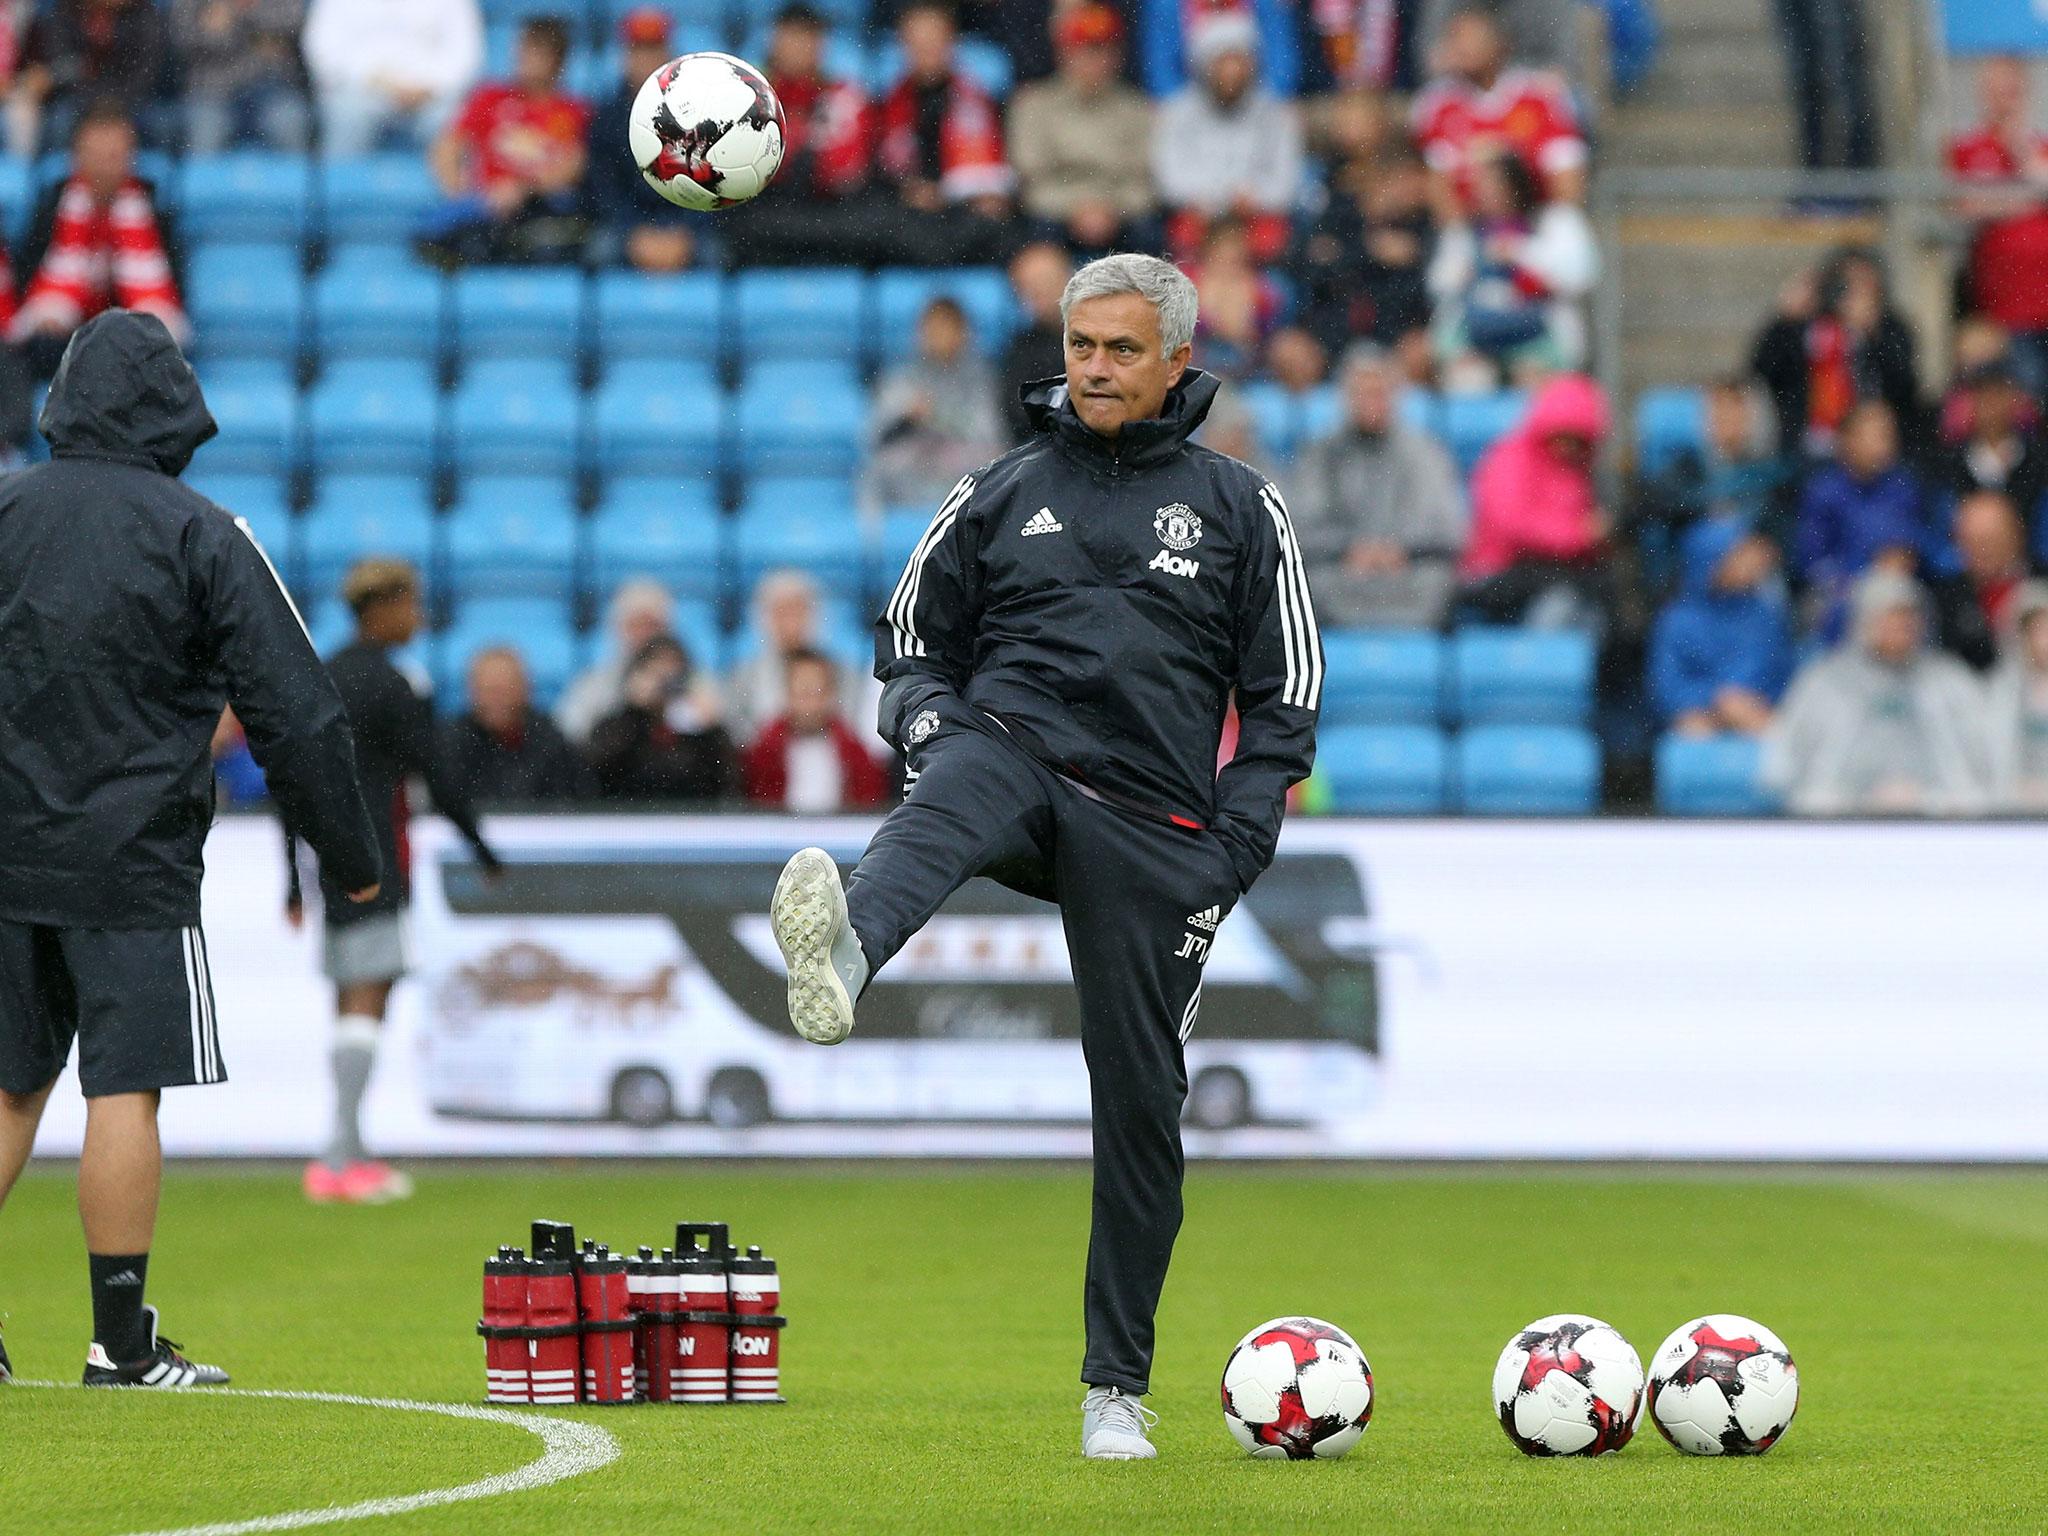 Jose Mourinho is looking to end his pre-season on a high note